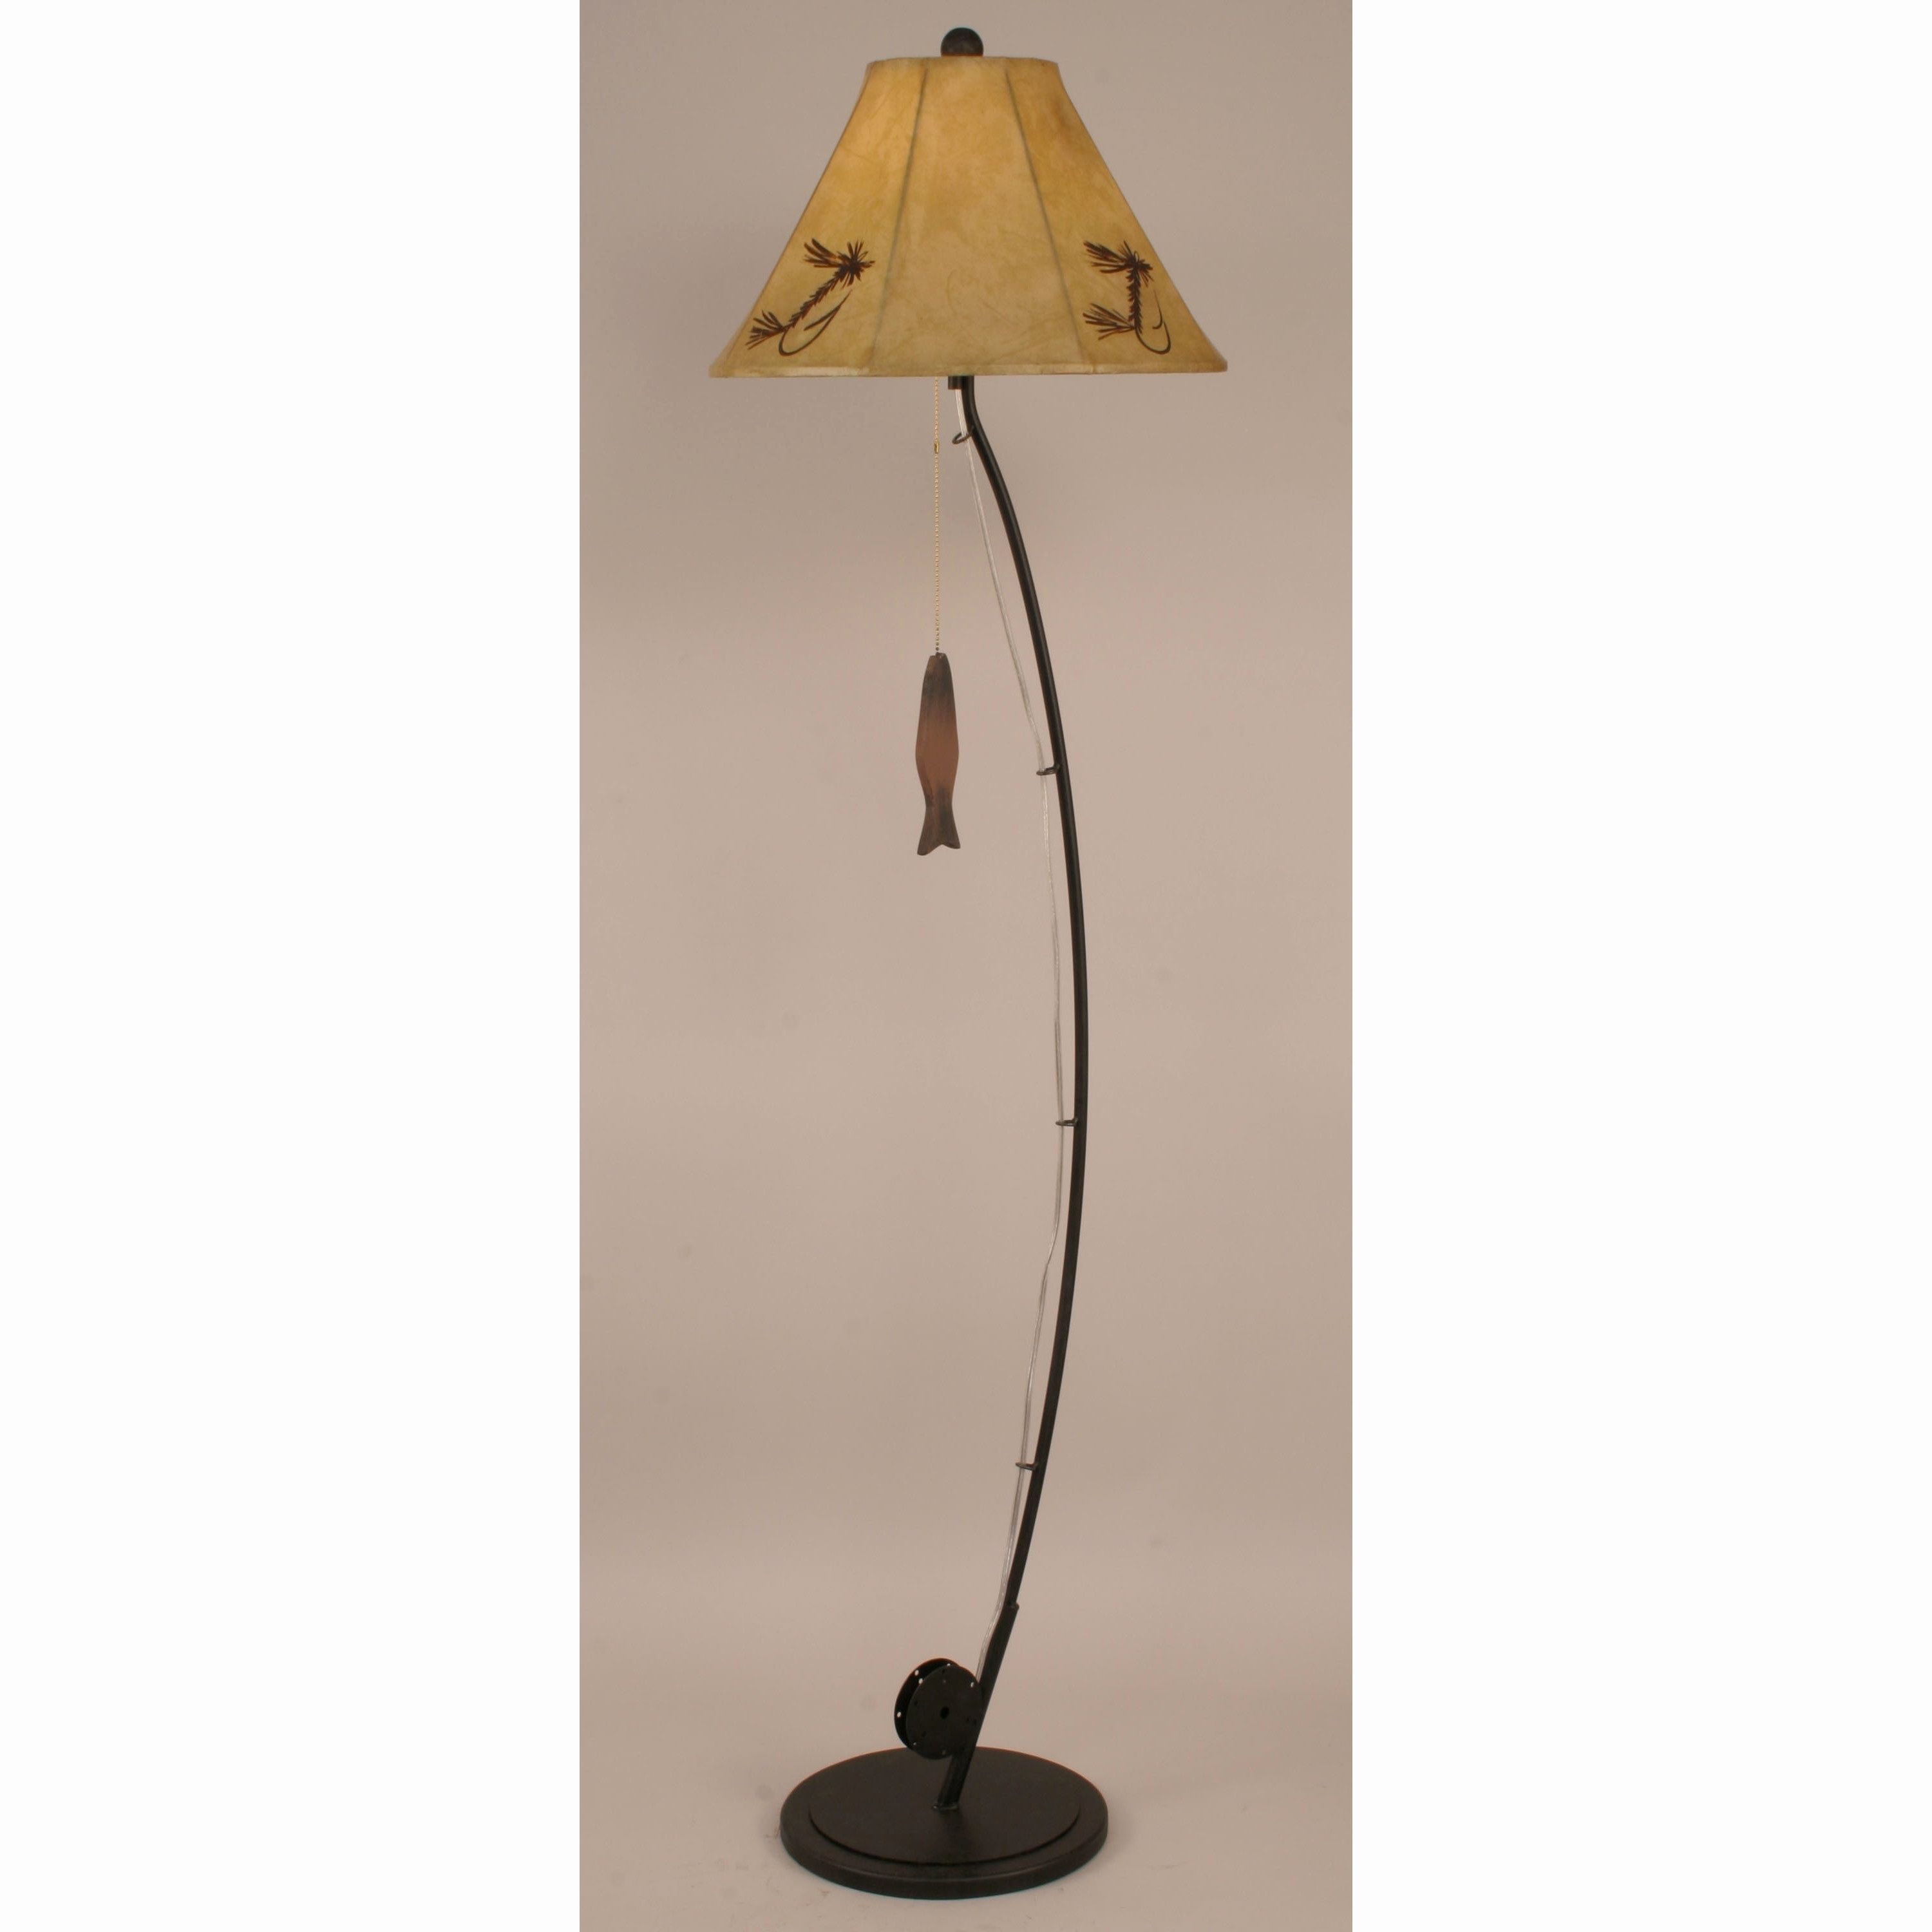 Top 52 Wonderful Contemporary Floor Lamps Western Table Industrial Intended For Western Table Lamps For Living Room (View 6 of 15)